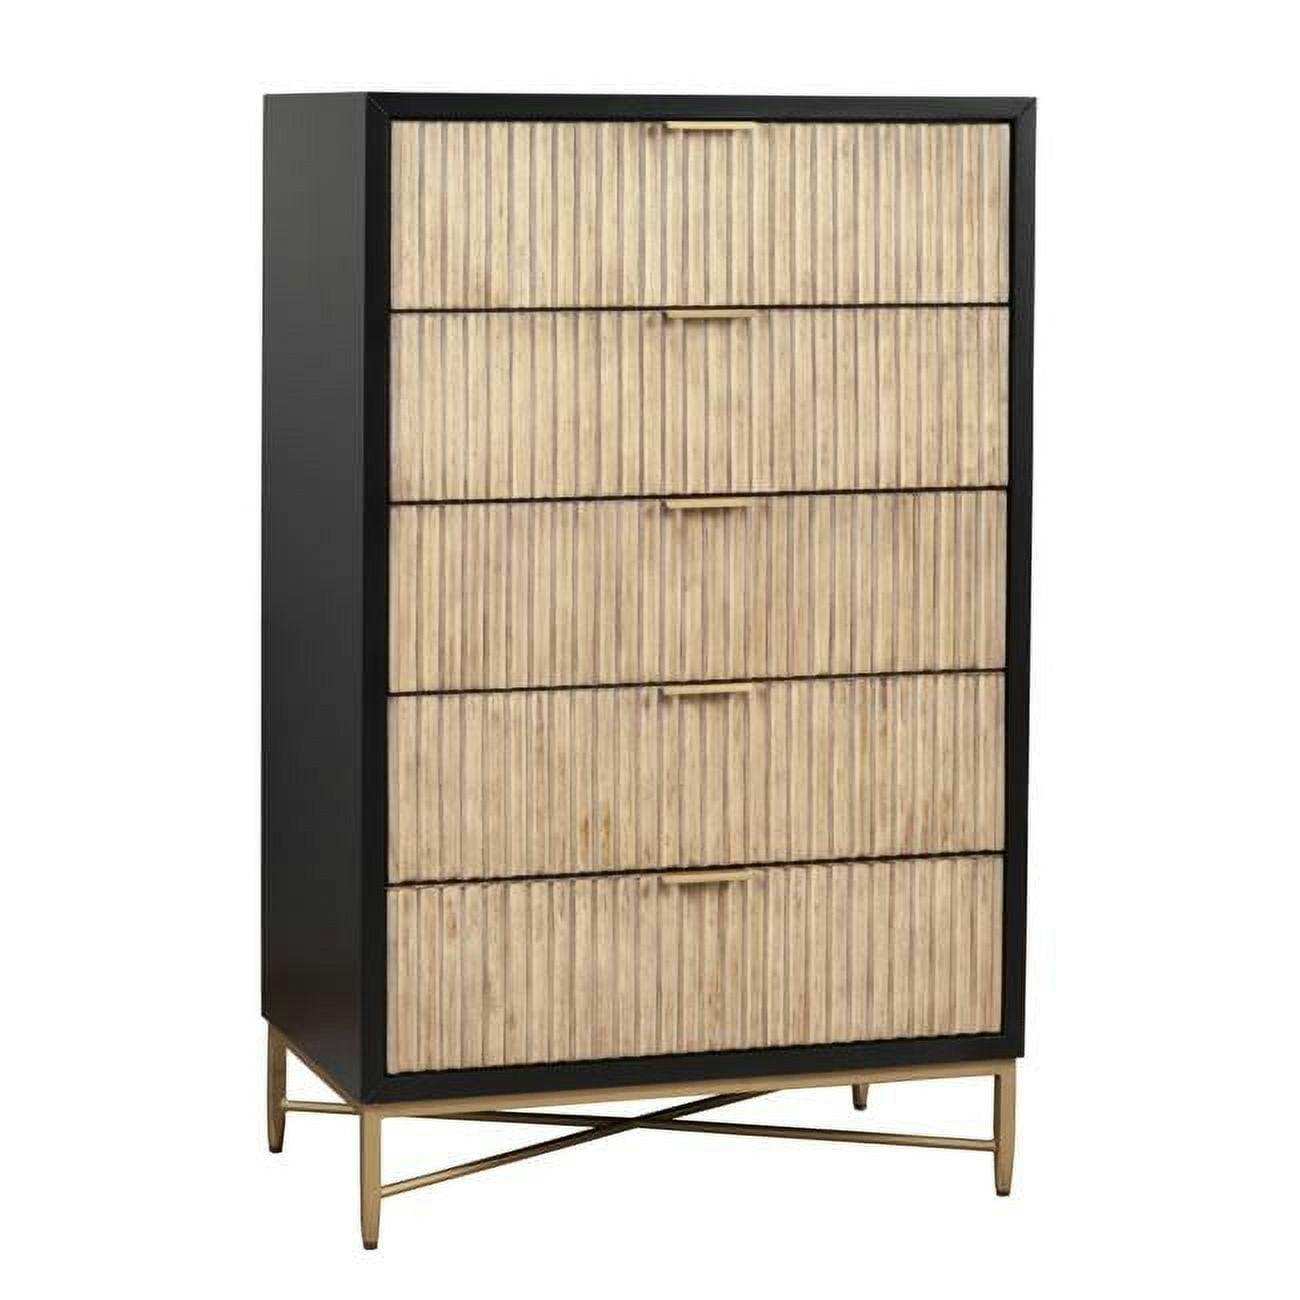 Elegant Mirrored Black Chest with Felt-Lined Drawers and Gold Metal Base